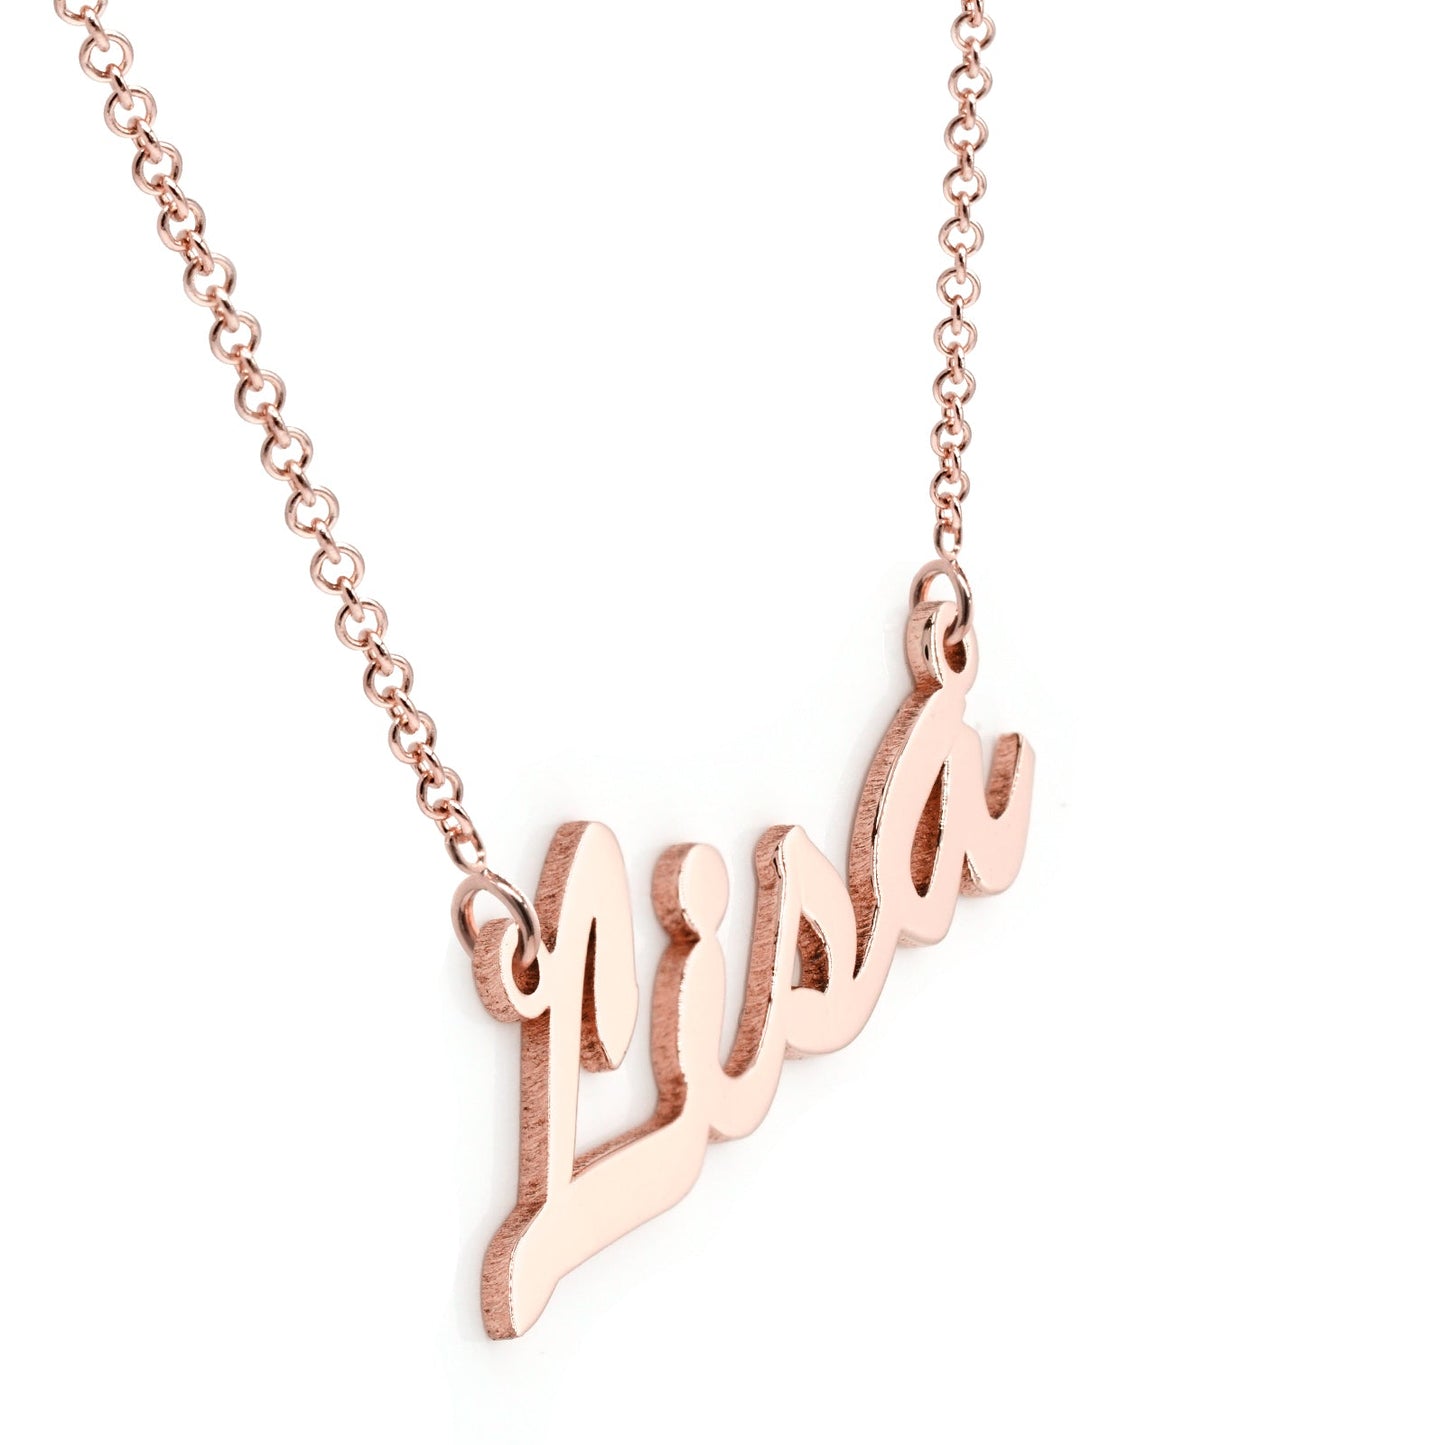 Personalized Sterling Silver Script Nameplate Necklace